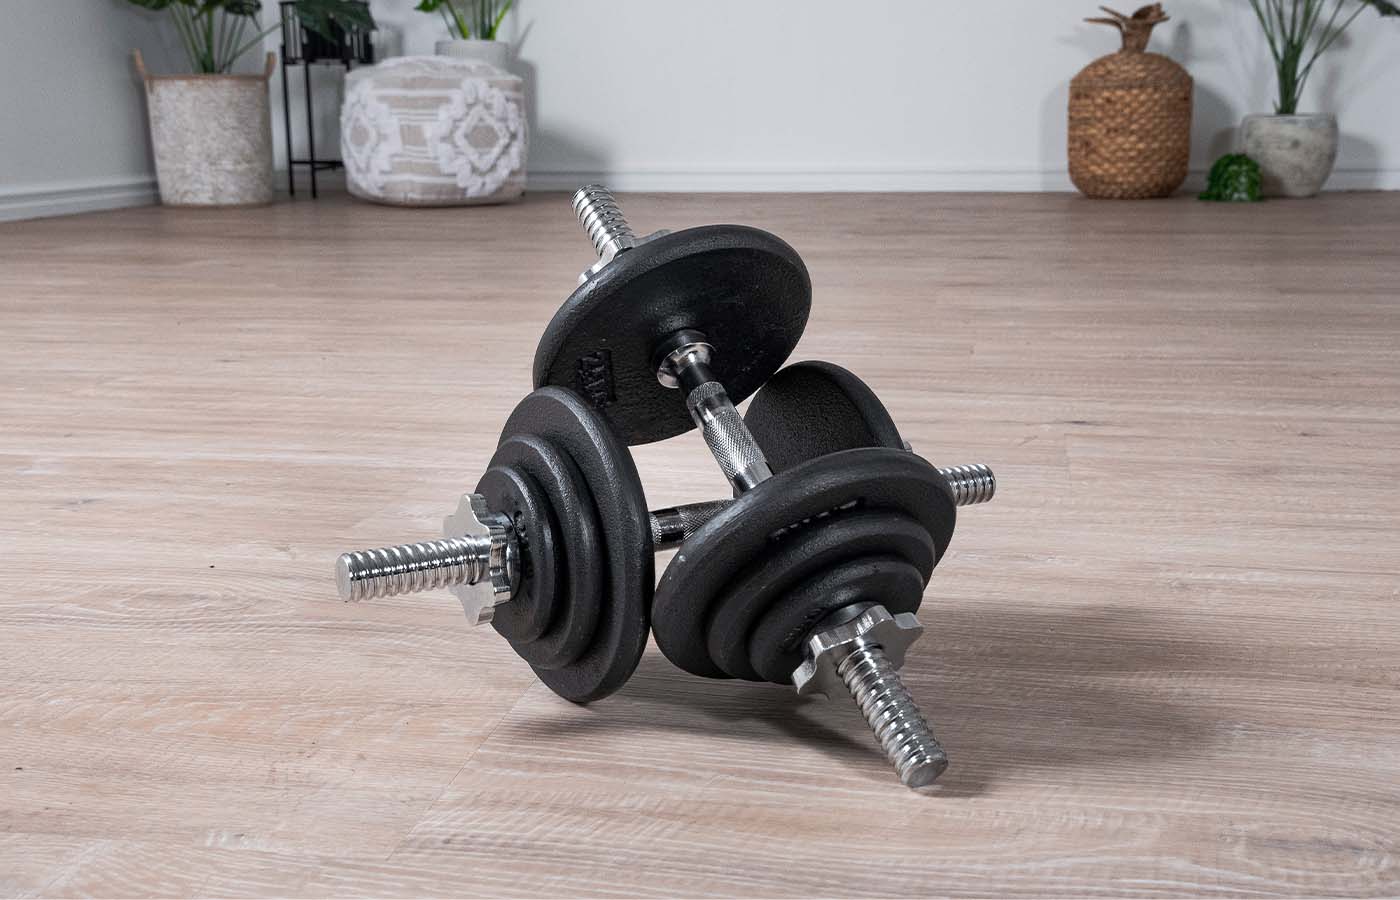 A pair of loaded dumbbells on the floor of a home workout space 